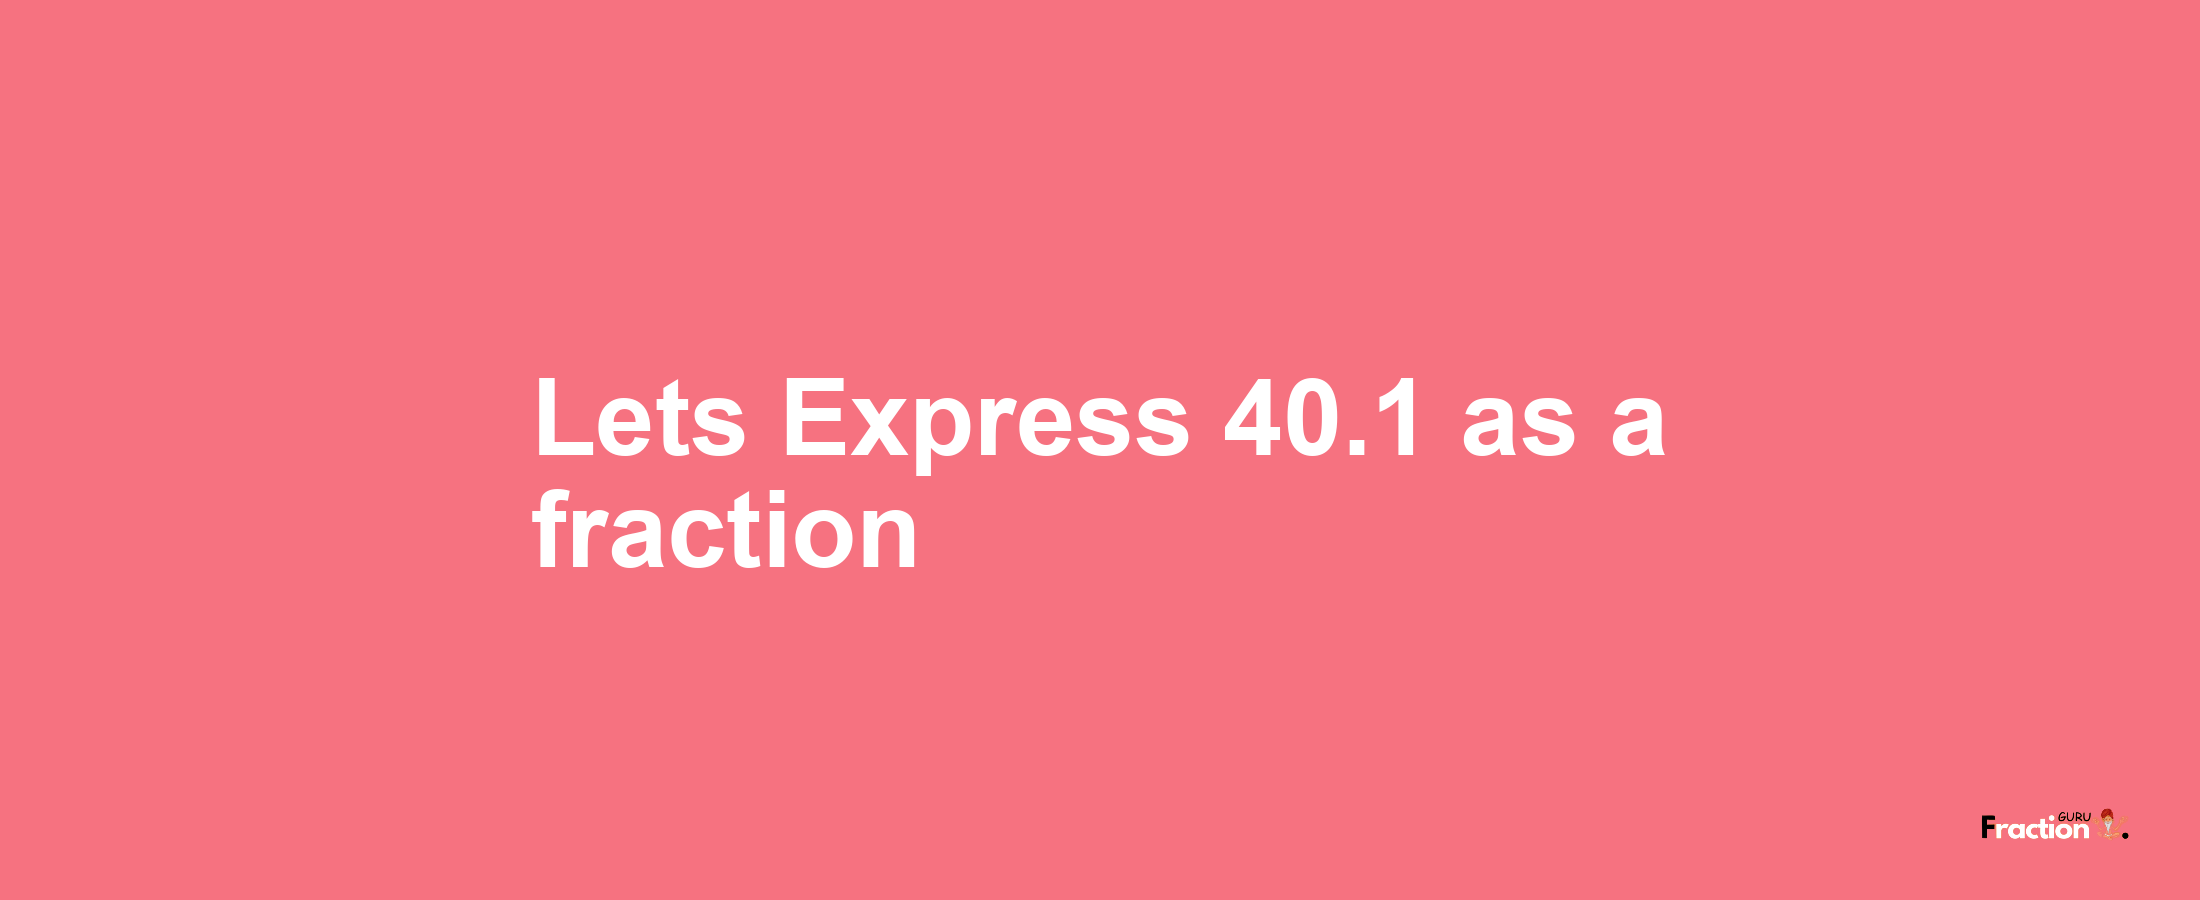 Lets Express 40.1 as afraction